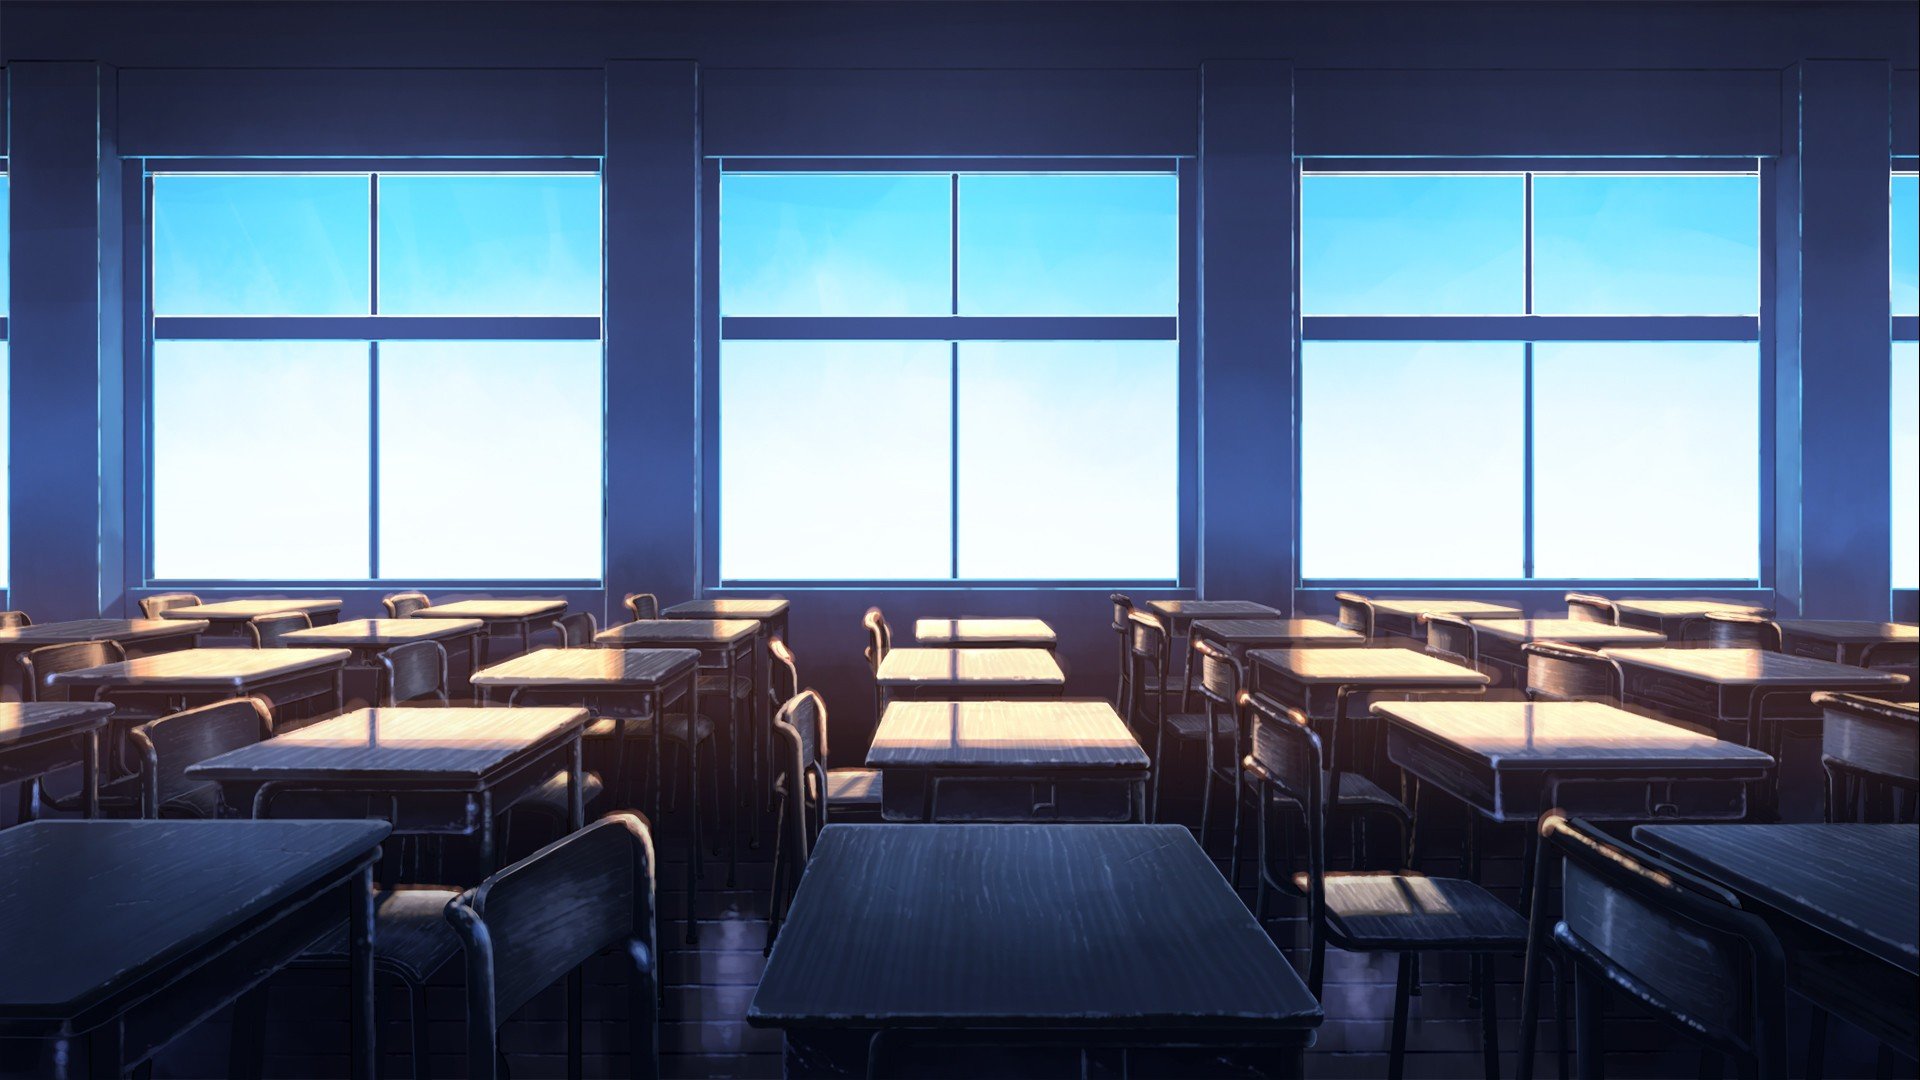 Classroom Evening 2d Anime Background Illustration Stock Illustration -  Download Image Now - iStock